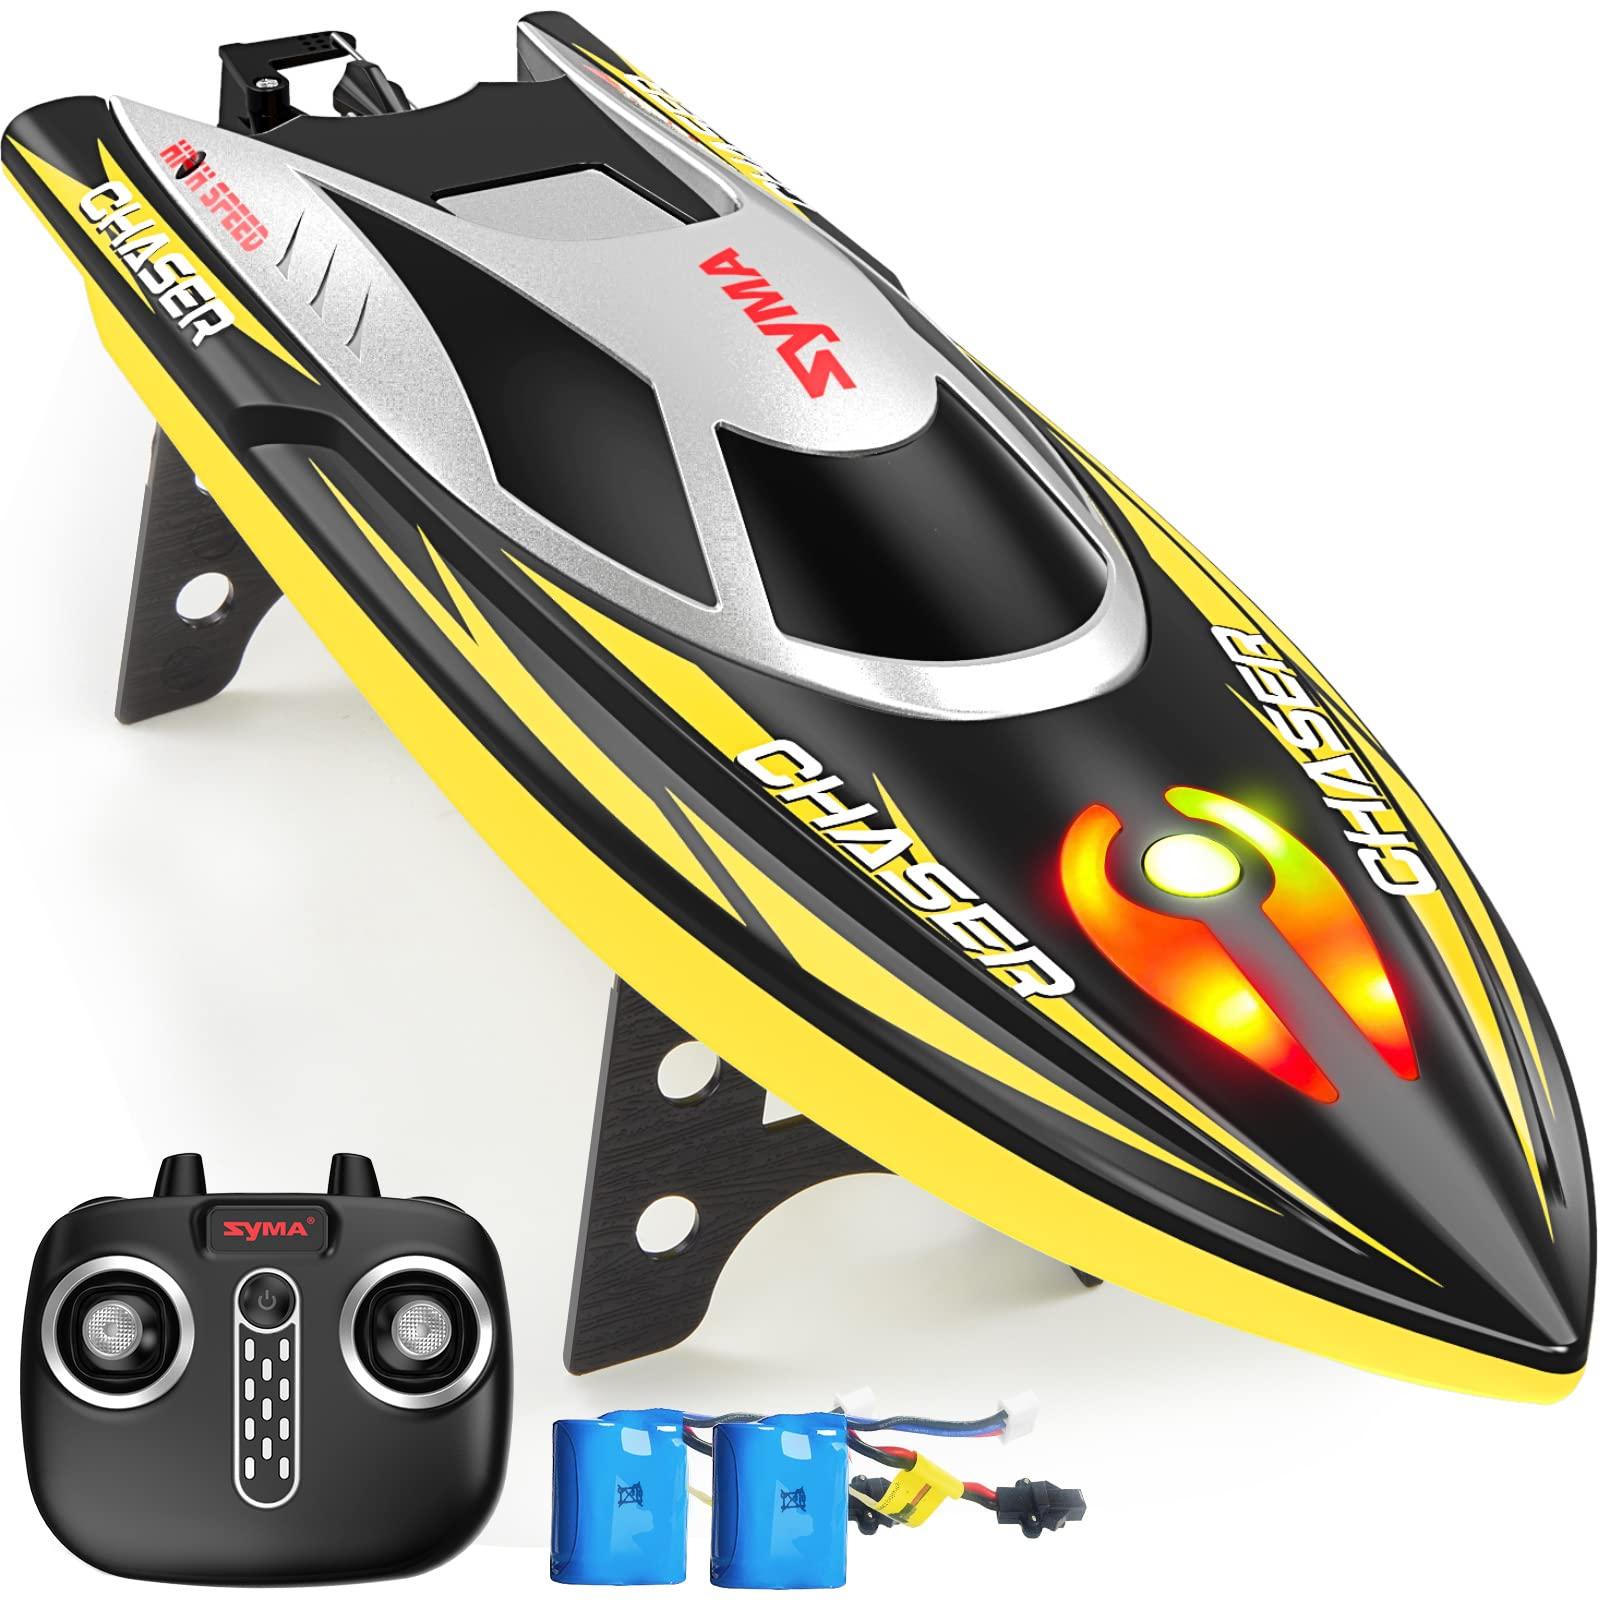 Syma Boat: Troubleshooting Syma Boats: Tips for Flipping and Wind Control